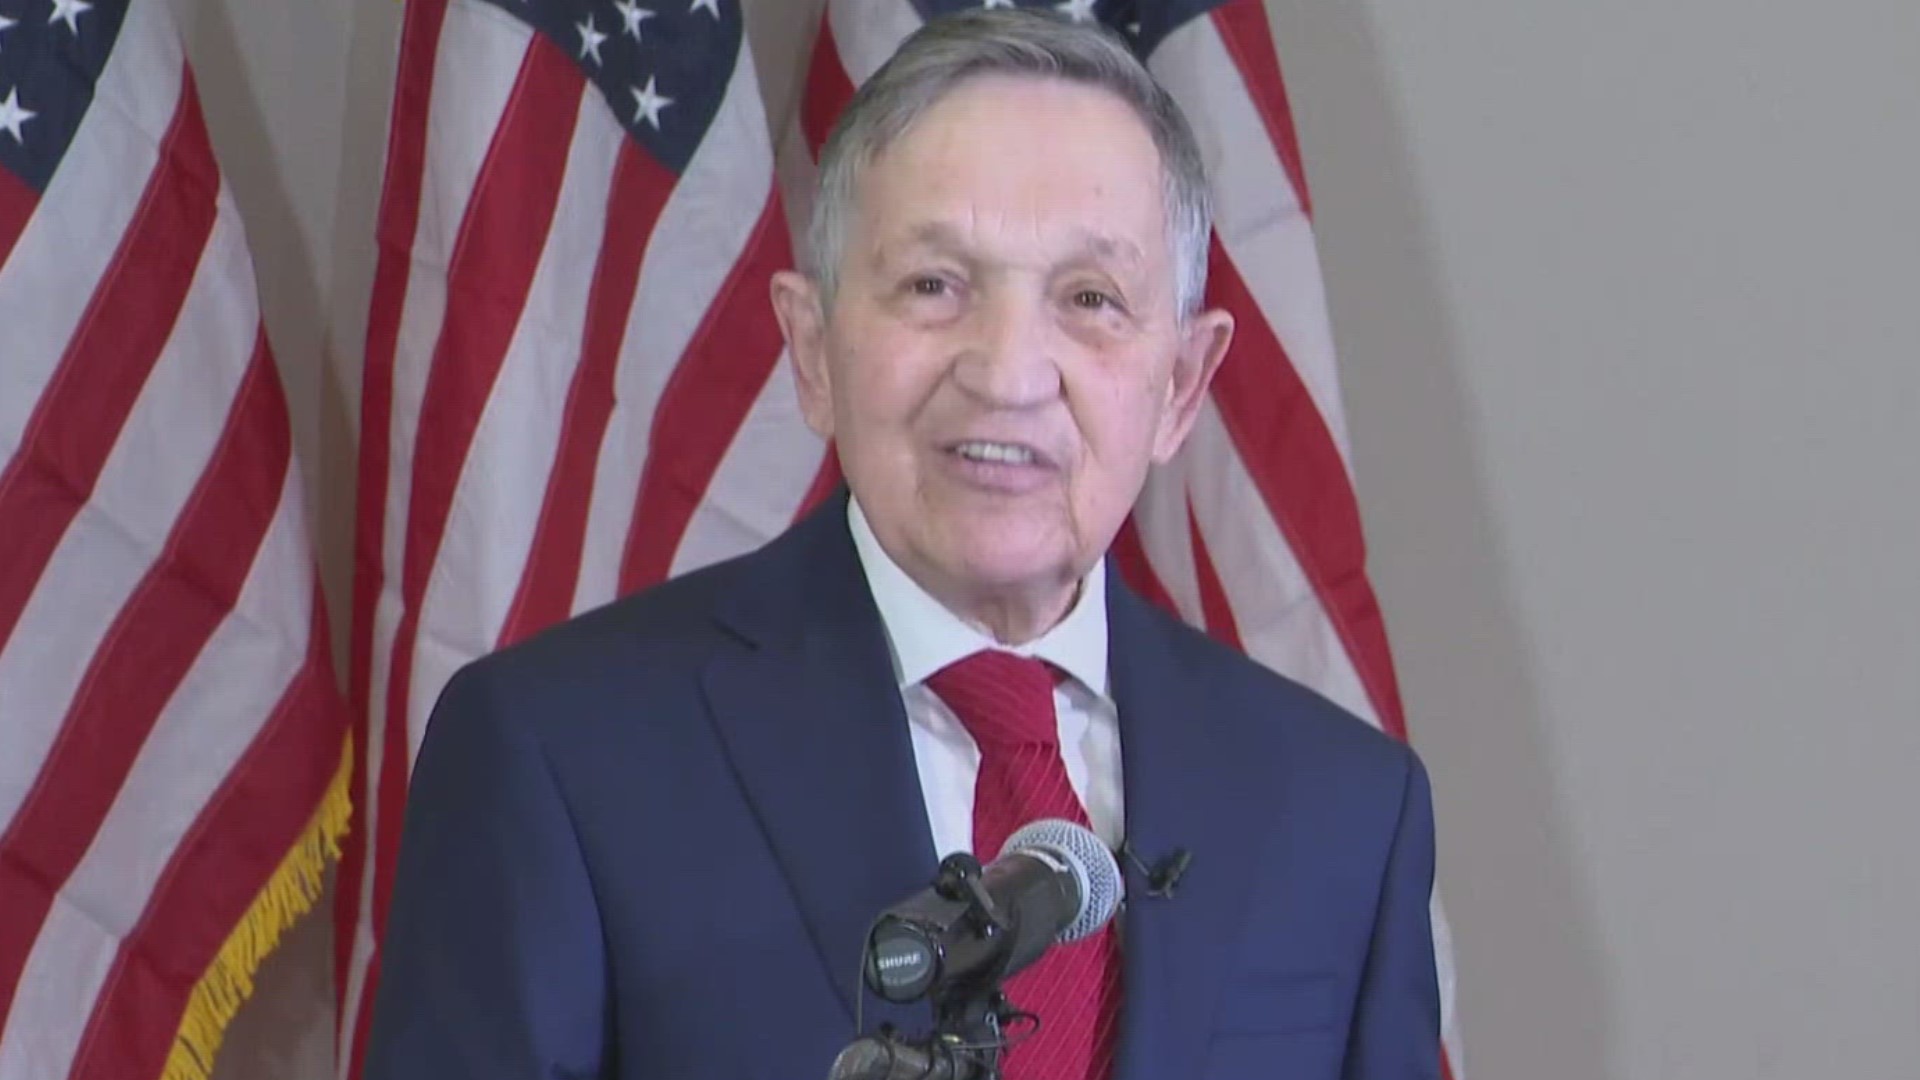 Kucinich, who served in the House of Representatives for 16 years, will run as an independent to represent Ohio's 7th Congressional District.